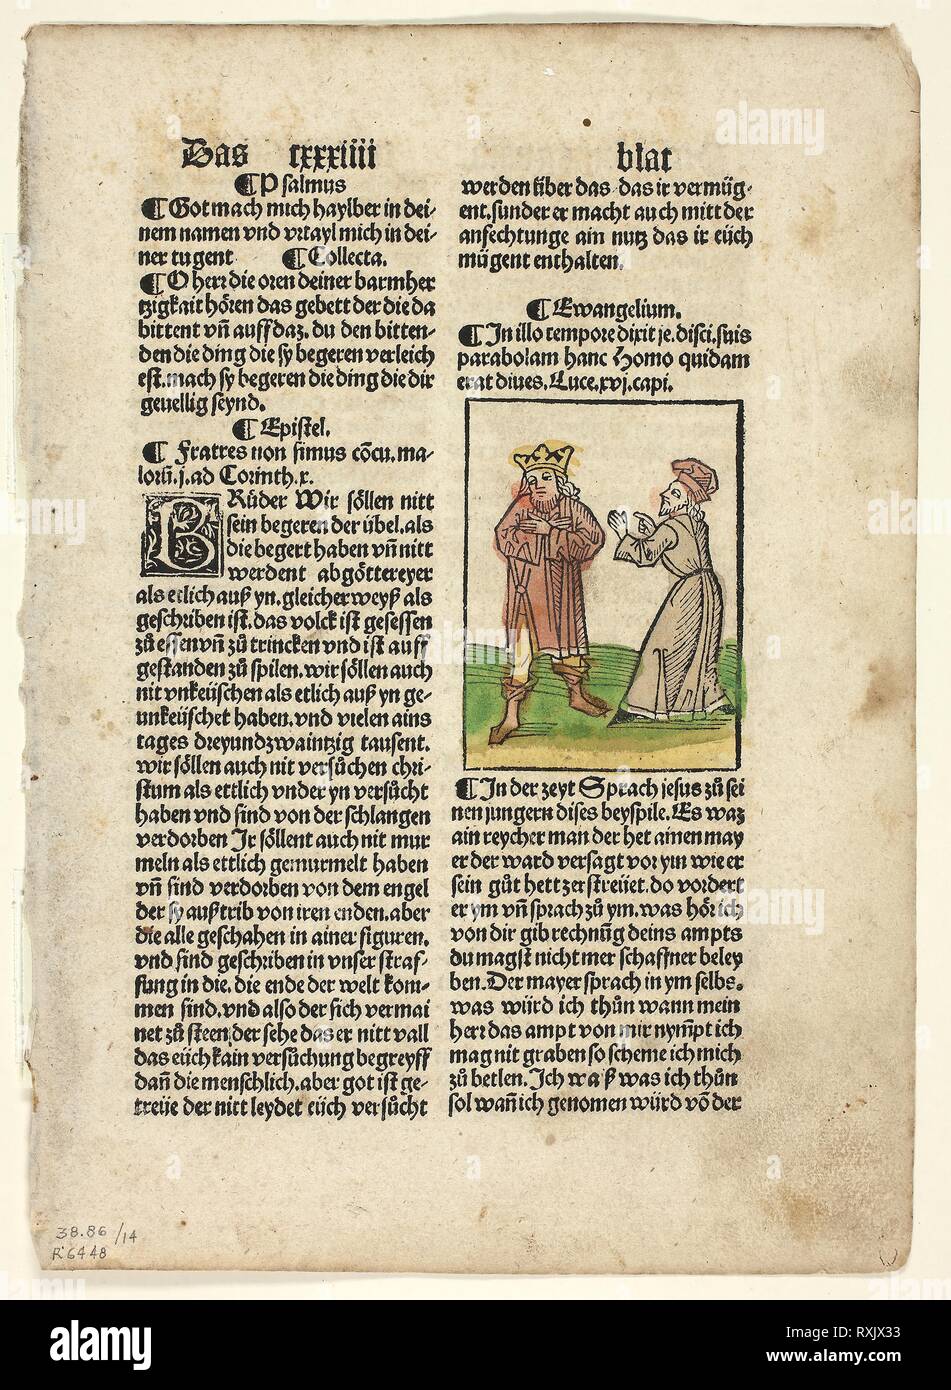 The Parable of the Unjust Steward from Plenarium, Plate 14 from Woodcuts from Books of the 15th Century. Unknown Artist (Augsburg, 15th century); printed and published by Johann Schönsperger the Elder (German, c. 1455-1521); portfolio text by Wilhelm Ludwig Schreiber (German, 1855-1932). Date: 1497. Dimensions: 80 x 60 mm (image); 271 x 195 mm (sheet). Woodcut in black with hand-colored additions, and letterpress in black (recto and verso), on buff laid paper, tipped onto cream wove paper mat. Origin: Germany. Museum: The Chicago Art Institute. Stock Photo